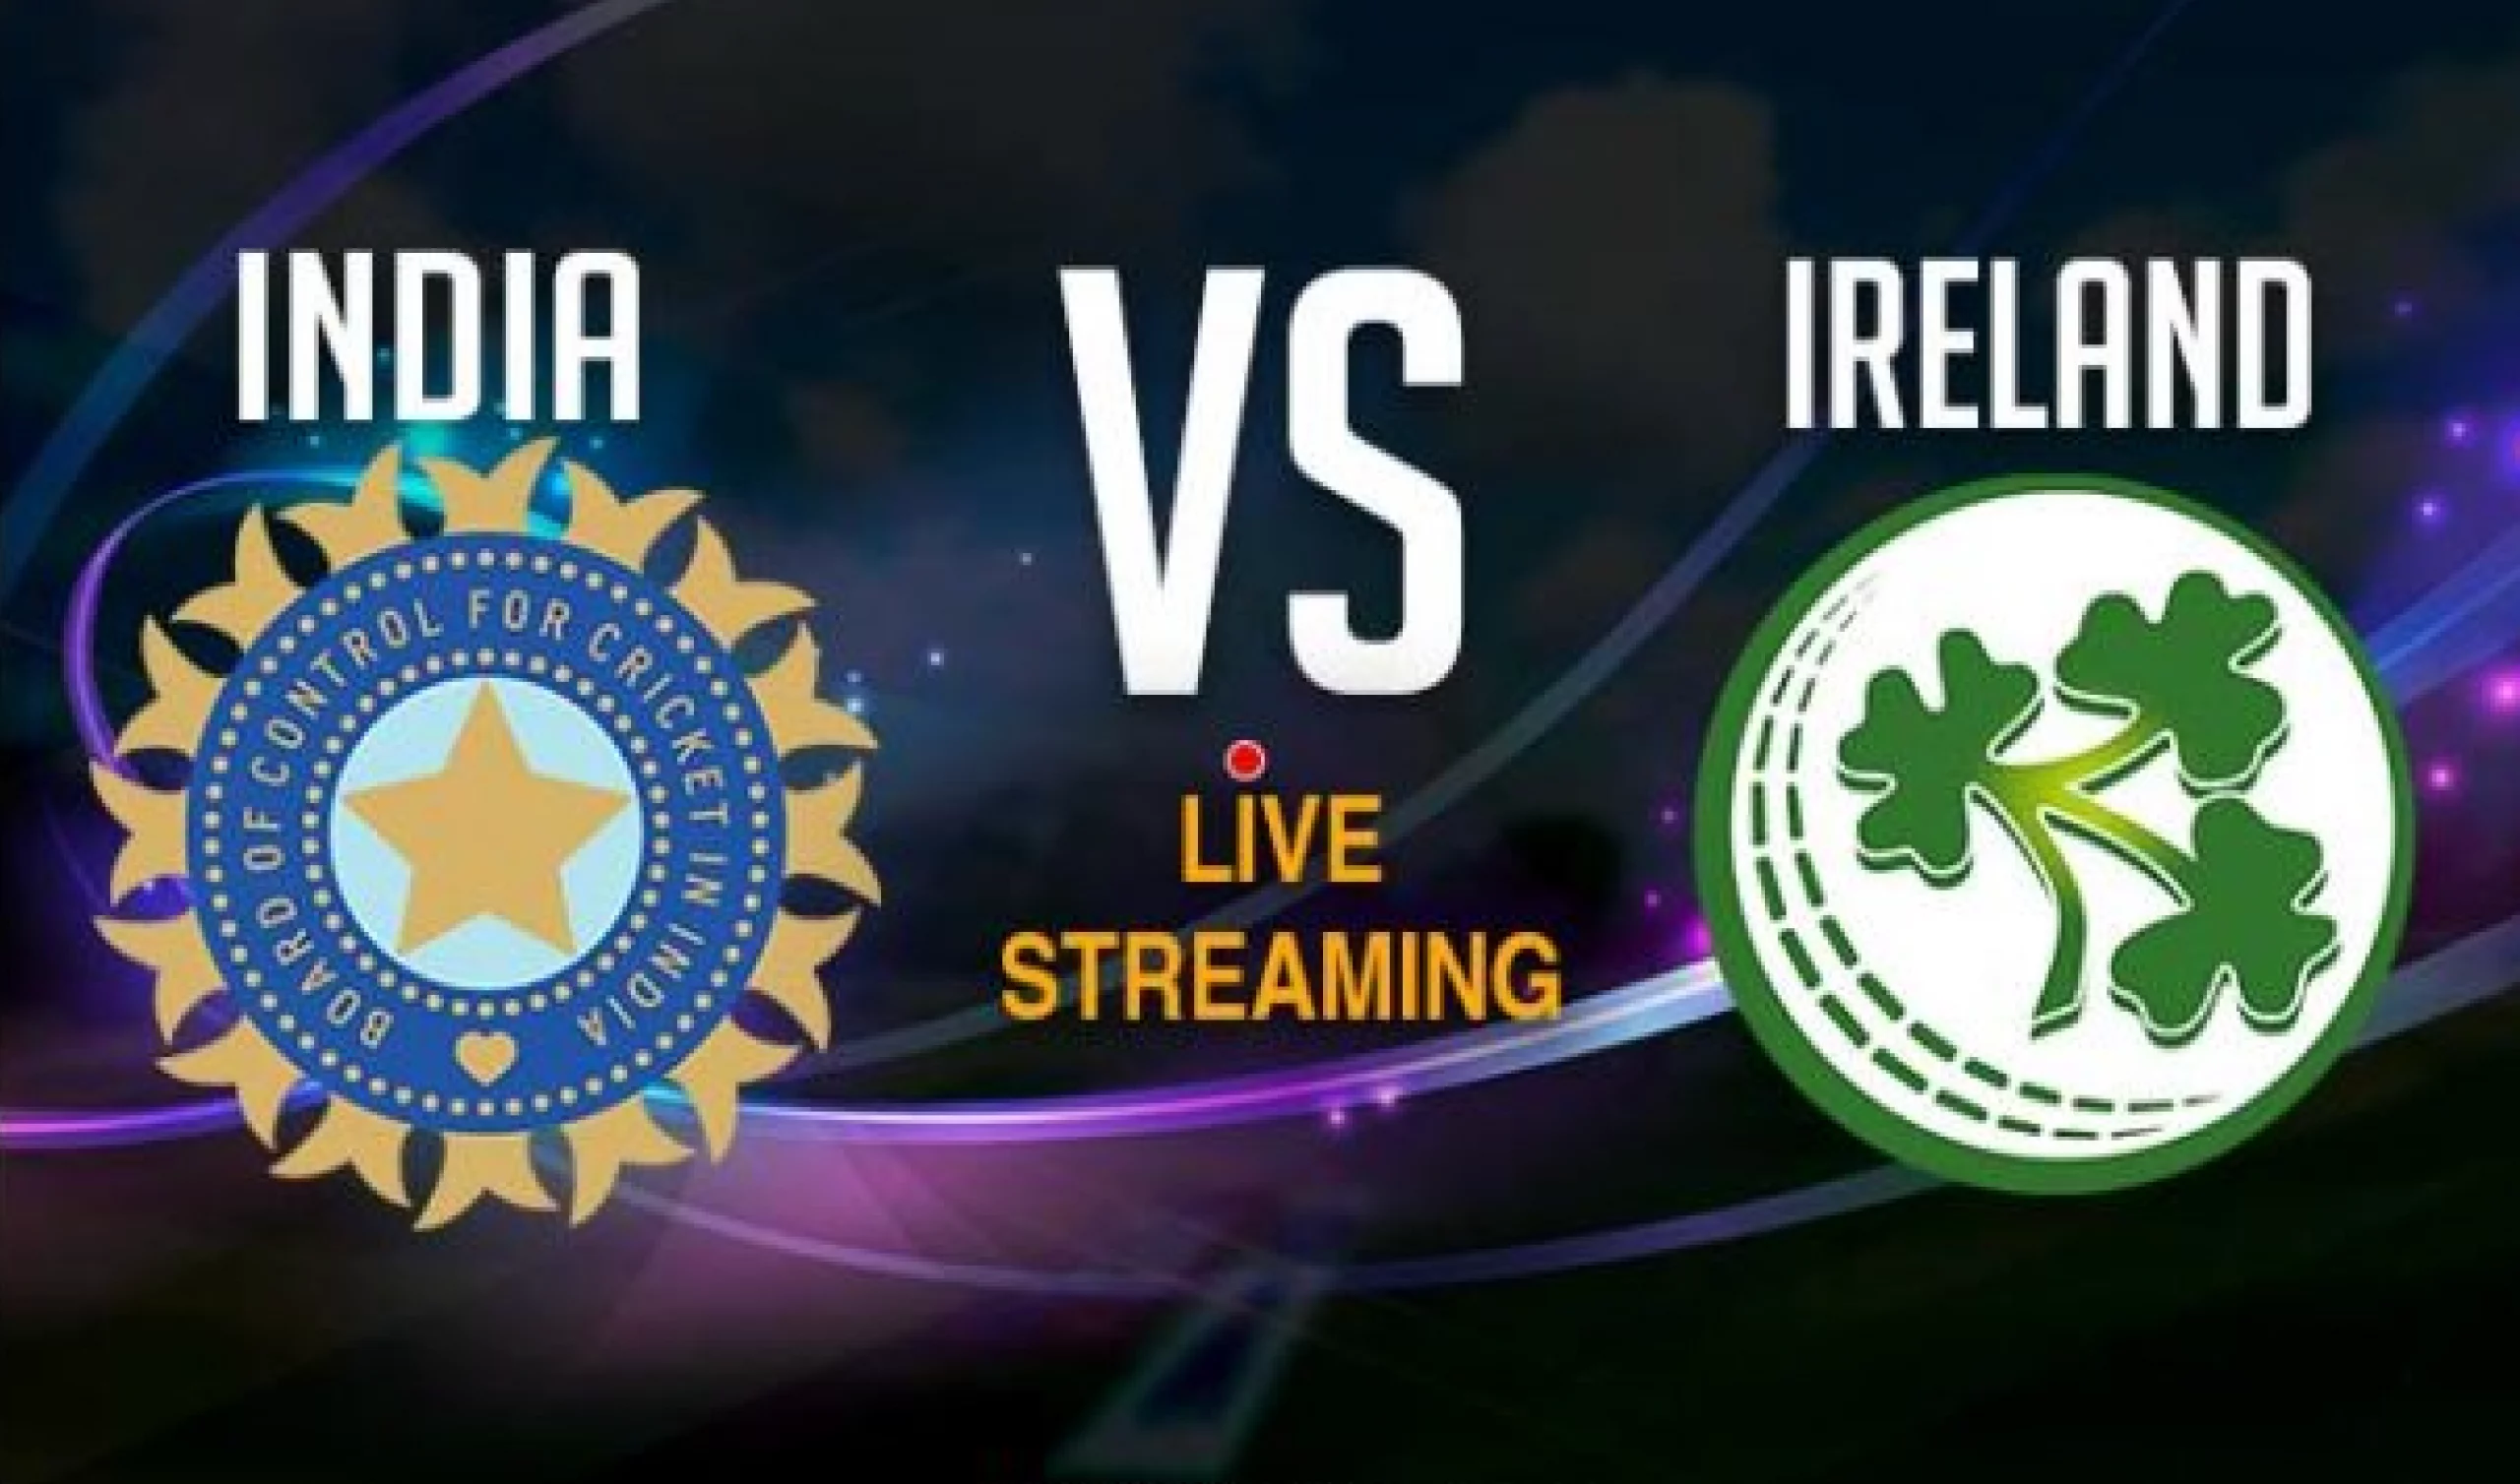 India Vs Ireland T20 2022 Live Streaming Free How to watch IND vs Ire 2nd T20I Live on Mobile and TV